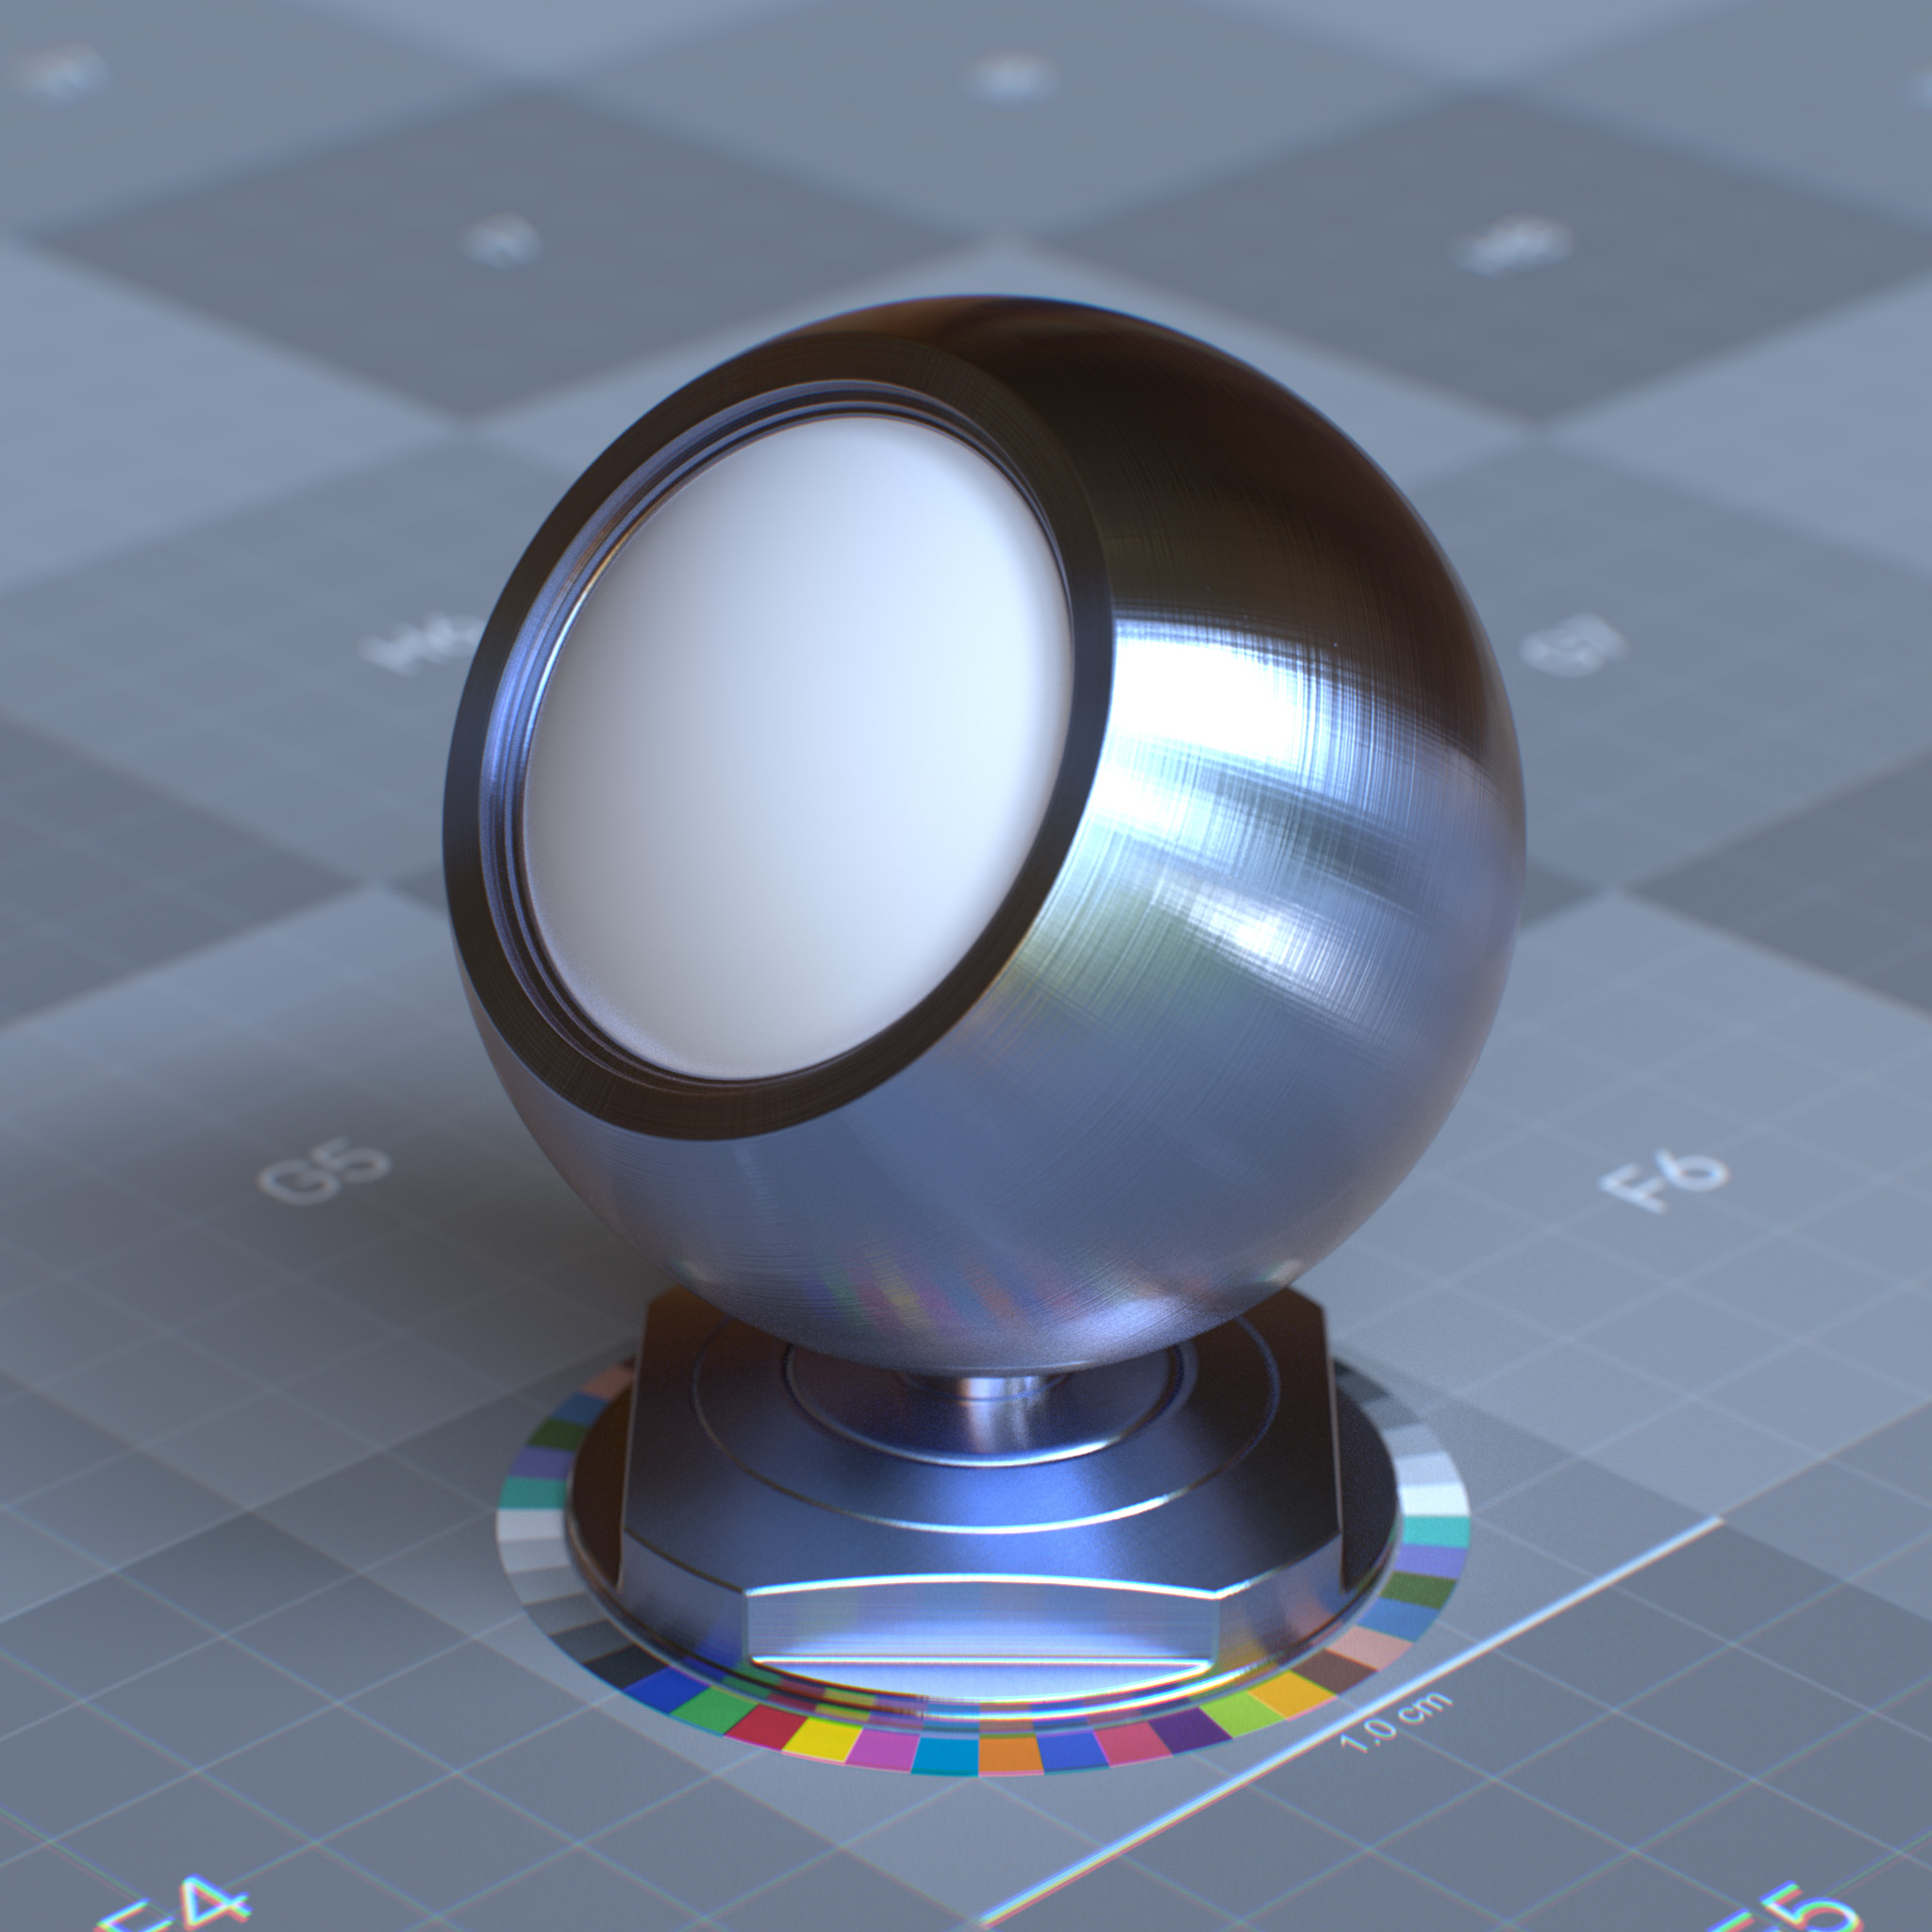 rtx_material_omnisurfacebase_specular_reflection_anisotropy_rotation_0p0